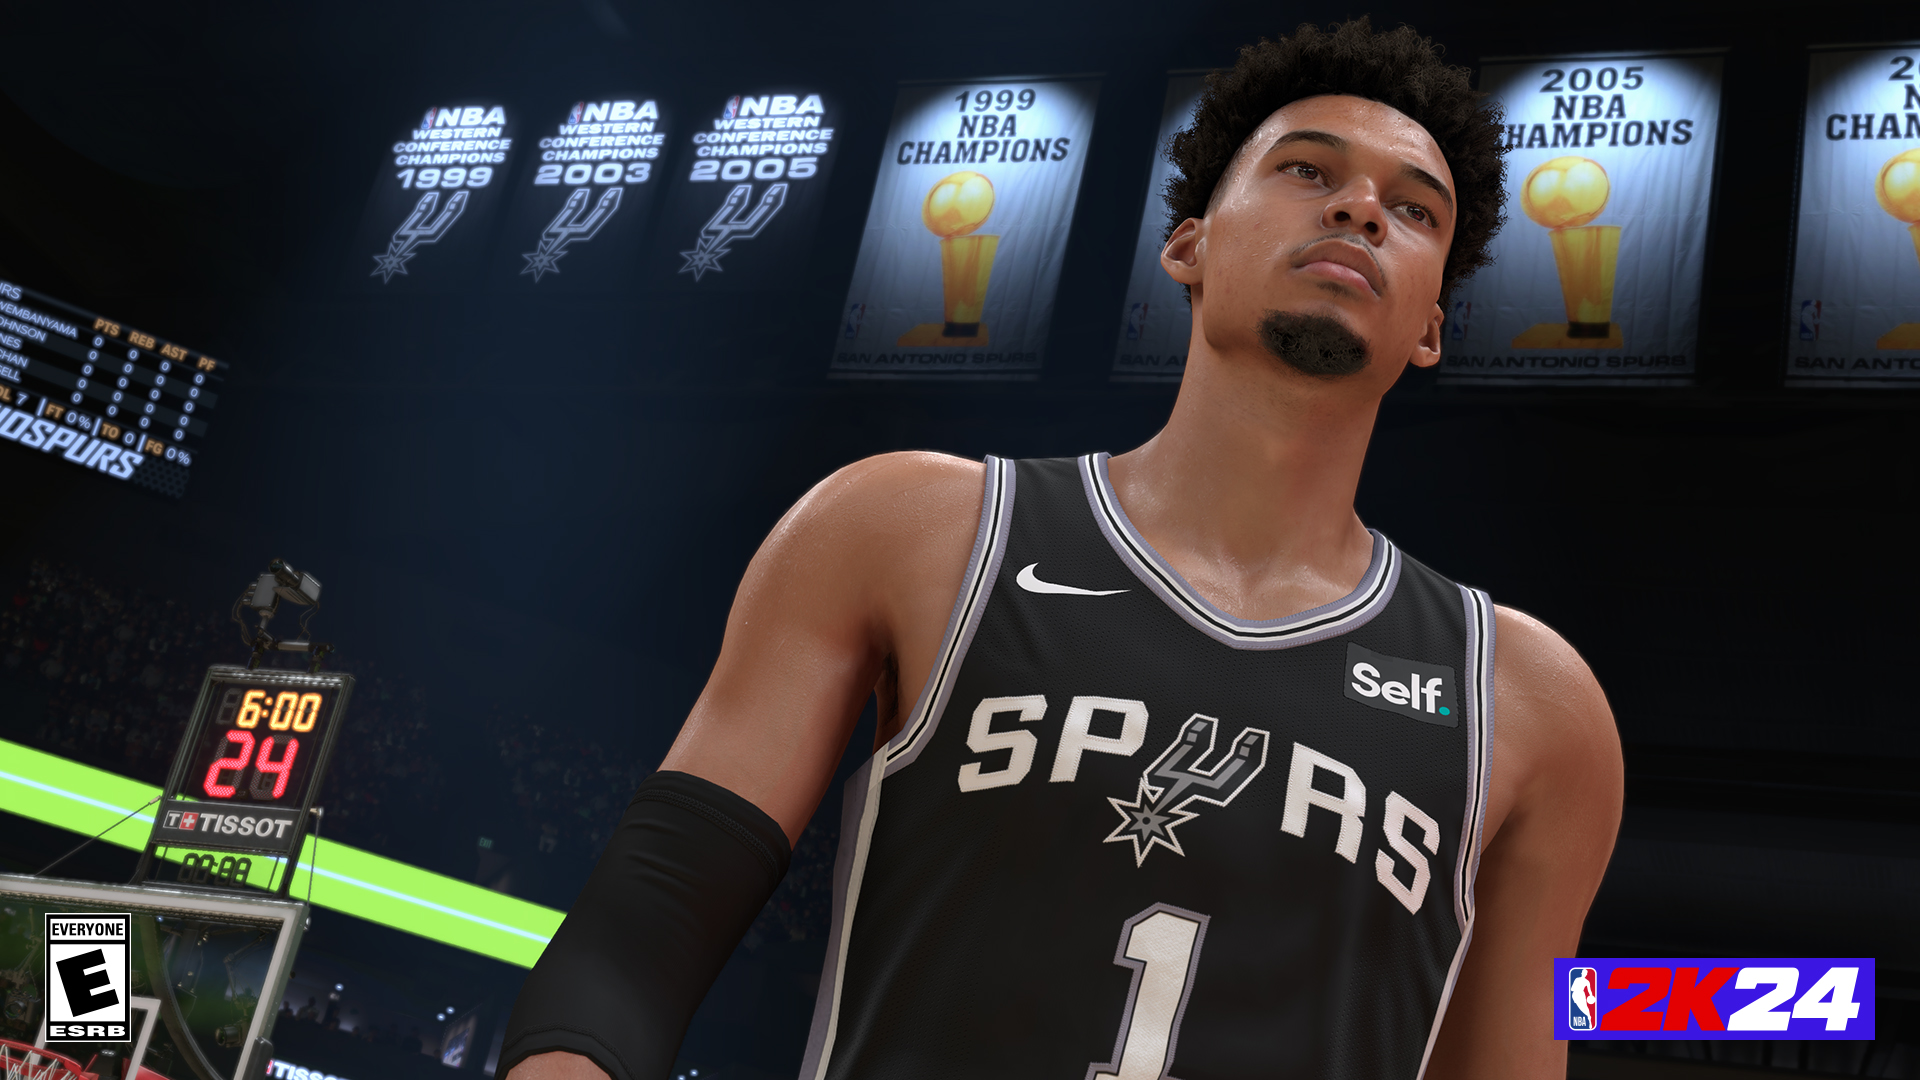 NBA 2K24: The known ratings for the 2023 NBA draft class